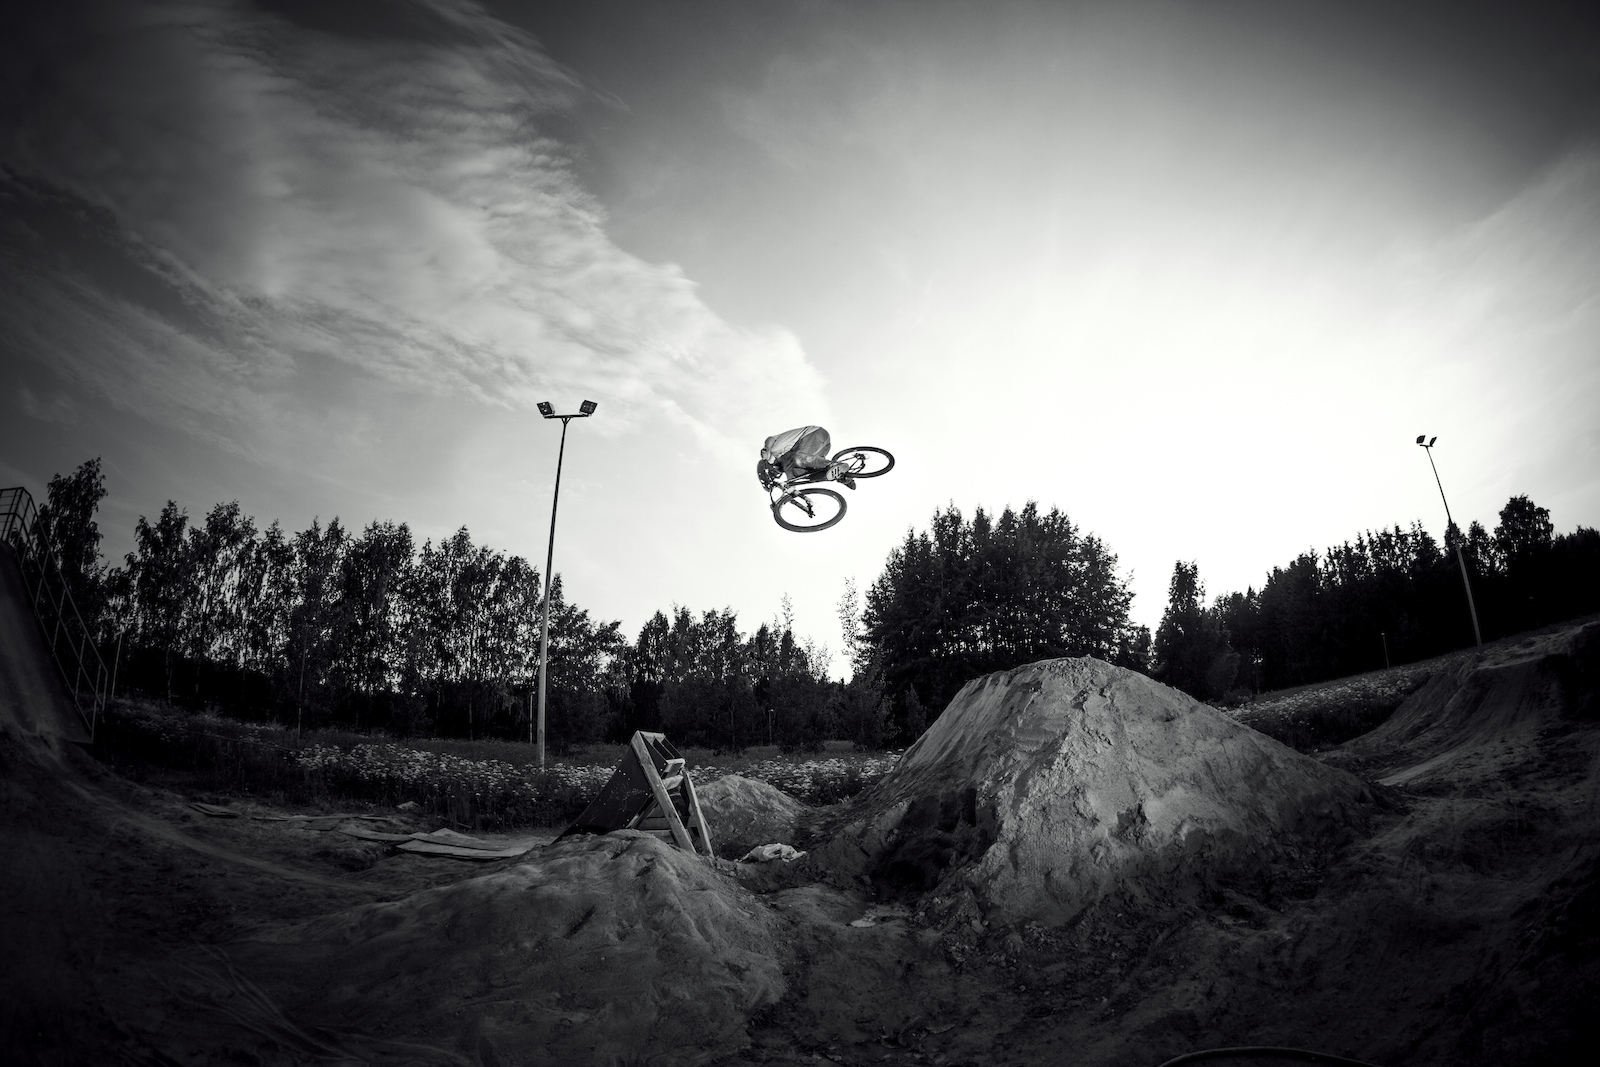 Another 360, photo by Petri Anttila https://www.facebook.com/PetriAnttilaPhotography?group_id=0